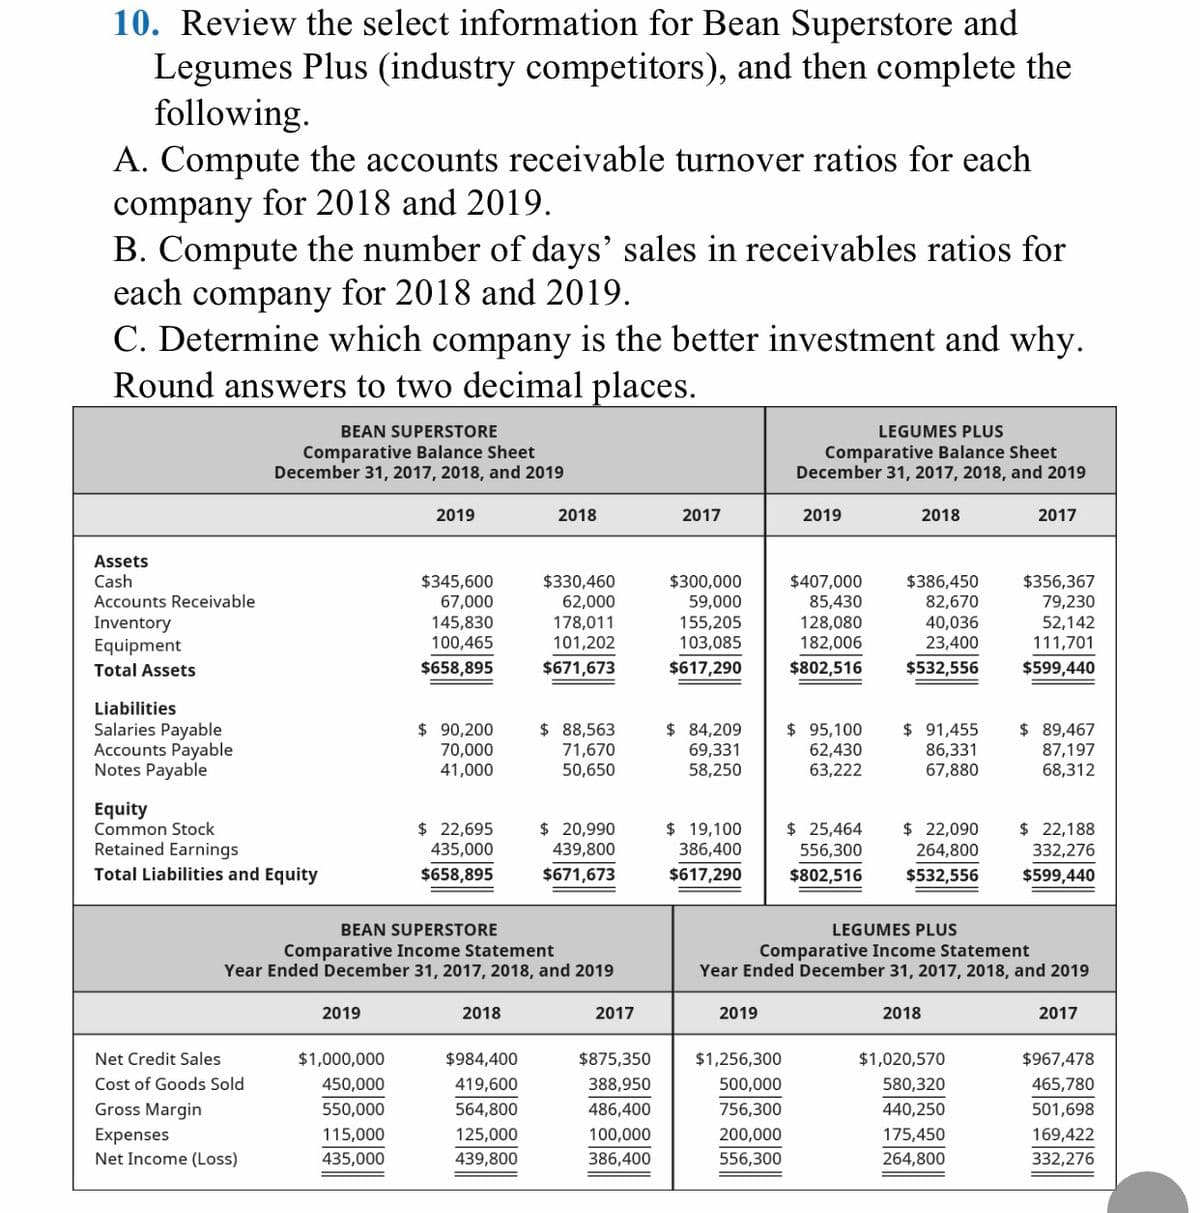 10. Review the select information for Bean Superstore and
Legumes Plus (industry competitors), and then complete the
following.
A. Compute the accounts receivable turnover ratios for each
company
for 2018 and 2019.
B. Compute the number of days' sales in receivables ratios for
each company for 2018 and 2019.
C. Determine which company is the better investment and why.
Round answers to two decimal places.
BEAN SUPERSTORE
LEGUMES PLUS
Comparative Balance Sheet
December 31, 2017, 2018, and 2019
Comparative Balance Sheet
December 31, 2017, 2018, and 2019
2019
2018
2017
2019
2018
2017
Assets
Cash
$345,600
67,000
145,830
100,465
$330,460
62,000
178,011
101,202
$300,000
59,000
155,205
103,085
$407,000
85,430
128,080
182,006
$386,450
82,670
40,036
23,400
$356,367
79,230
52,142
111,701
Accounts Receivable
Inventory
Equipment
Total Assets
$658,895
$671,673
$617,290
$802,516
$532,556
$599,440
Liabilities
Salaries Payable
Accounts Payable
Notes Payable
$ 91,455
$ 90,200
70,000
41,000
$ 88,563
71,670
50,650
$ 84,209
69,331
58,250
$95,100
62,430
63,222
86,331
67,880
$ 89,467
87,197
68,312
Equity
Common Stock
Retained Earnings
$ 22,695
435,000
$ 19,100
386,400
$ 22,090
$ 20,990
439,800
$ 25,464
556,300
$ 22,188
332,276
264,800
Total Liabilities and Equity
$658,895
$671,673
$617,290
$802,516
$532,556
$599,440
BEAN SUPERSTORE
LEGUMES PLUS
Comparative Income Statement
Year Ended December 31, 2017, 2018, and 2019
Comparative Income Statement
Year Ended December 31, 2017, 2018, and 2019
2019
2018
2017
2019
2018
2017
Net Credit Sales
$1,000,000
$984,400
$875,350
$1,256,300
$1,020,570
$967,478
Cost of Goods Sold
450,000
419,600
388,950
500,000
580,320
465,780
Gross Margin
Expenses
Net Income (Loss)
550,000
564,800
486,400
756,300
440,250
501,698
115,000
125,000
100,000
200,000
175,450
169,422
435,000
439,800
386,400
556,300
264,800
332,276
